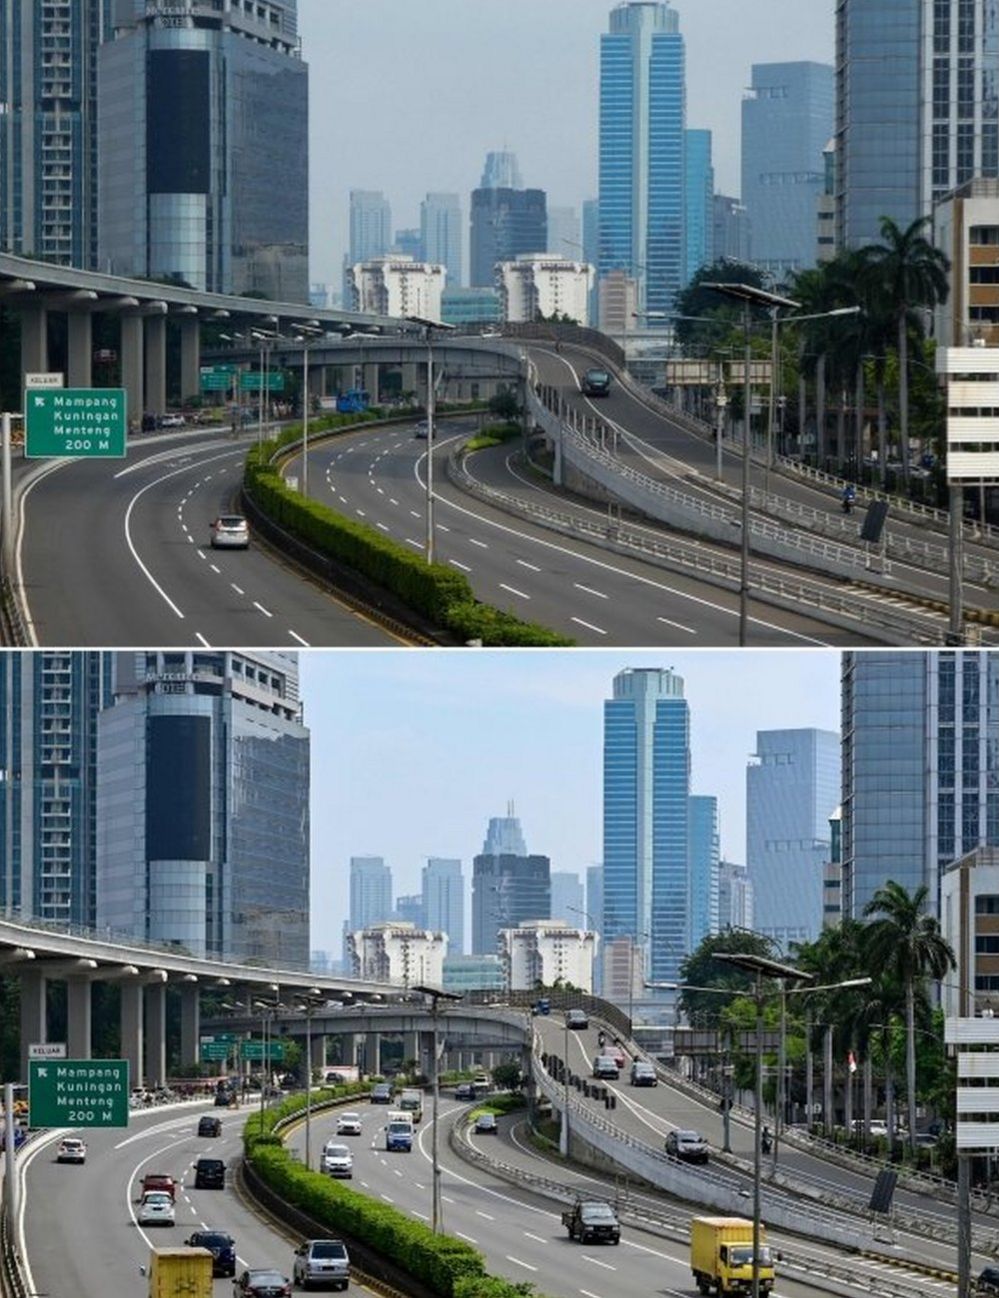 Vehicles commuting in a loose traffic in Indonesia's capital Jakarta on 10 April, 2020 (top) and traffic on the same road on 14 May